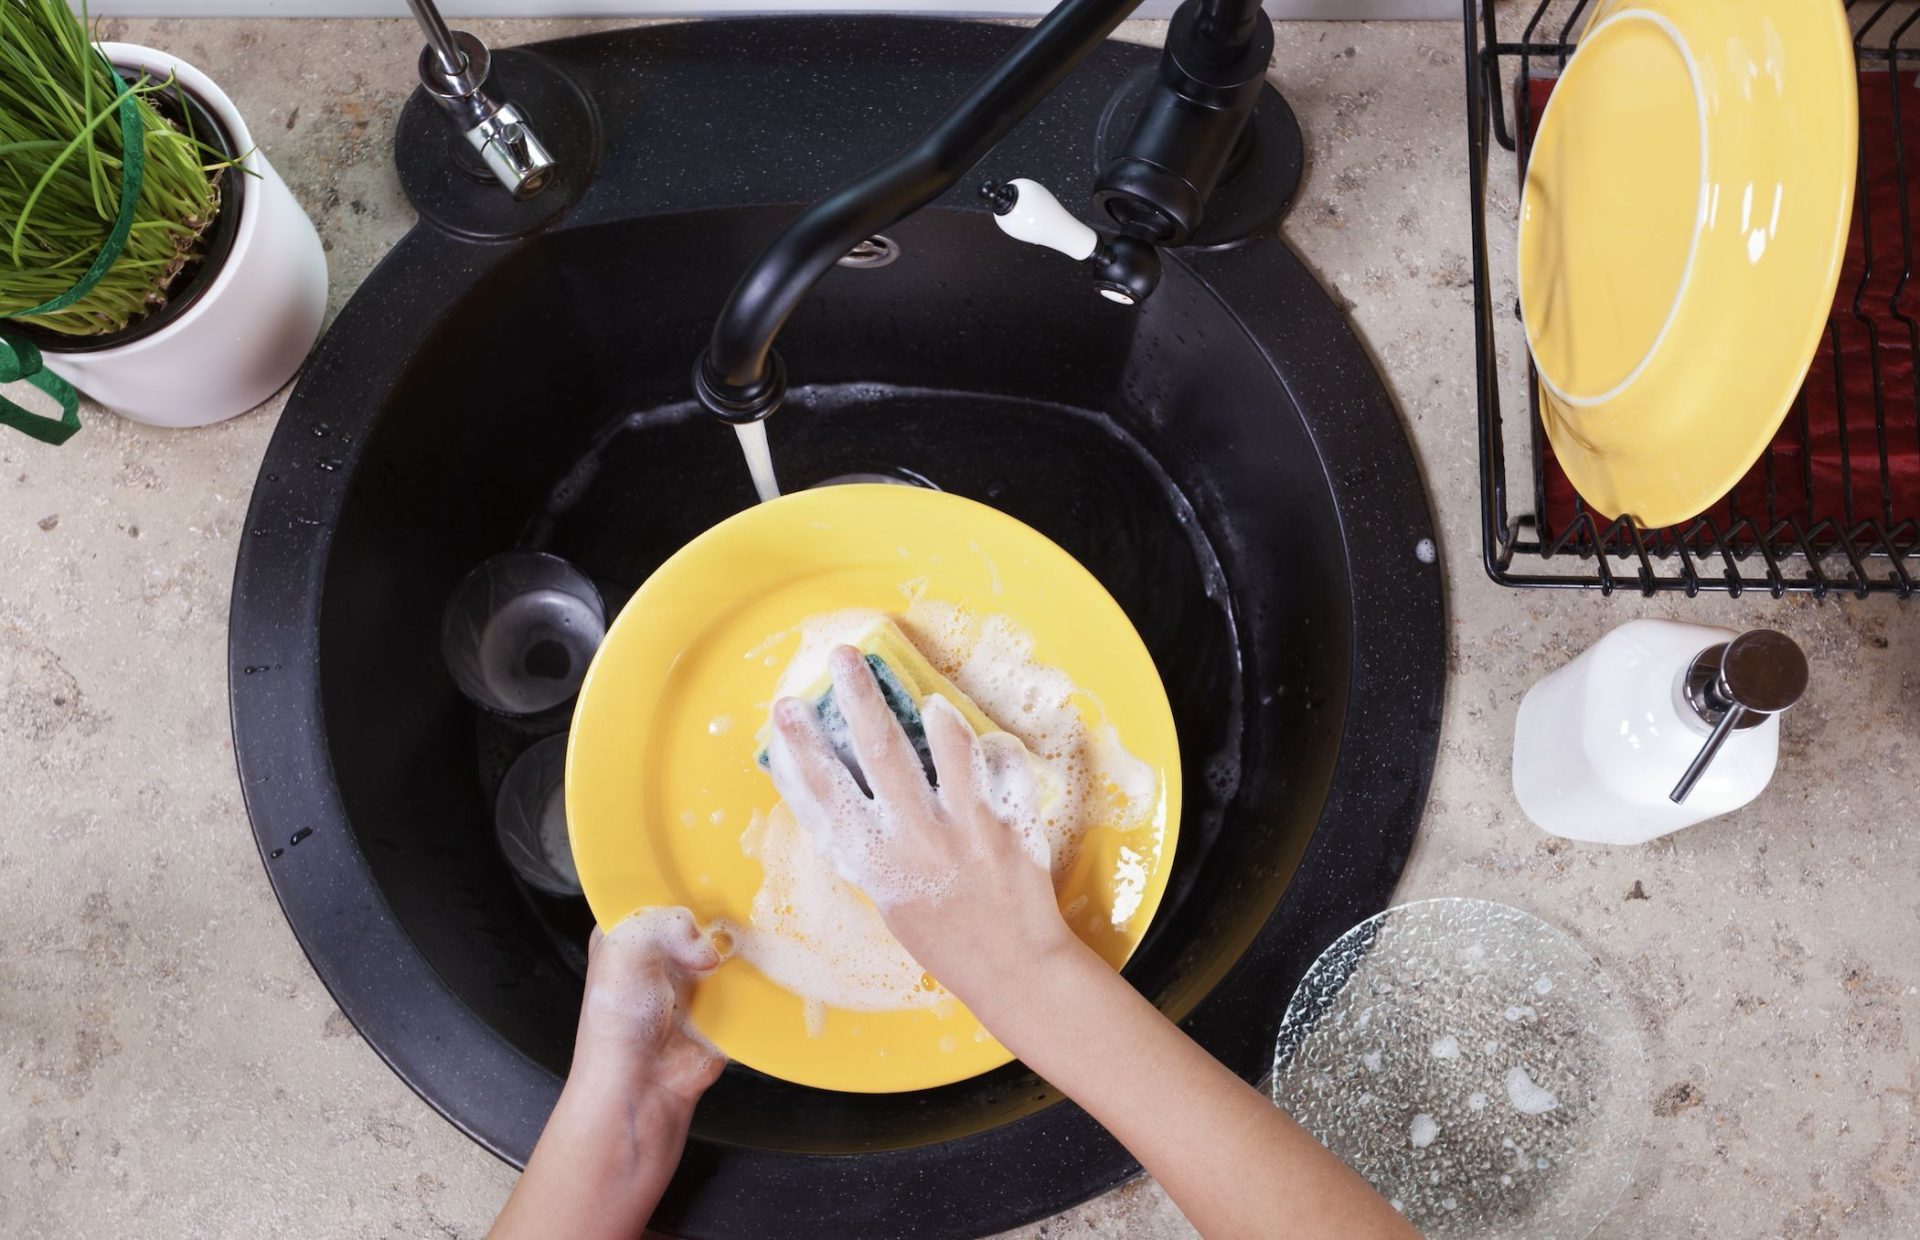 An image of someone washing plates that match the Orderly colour scheme